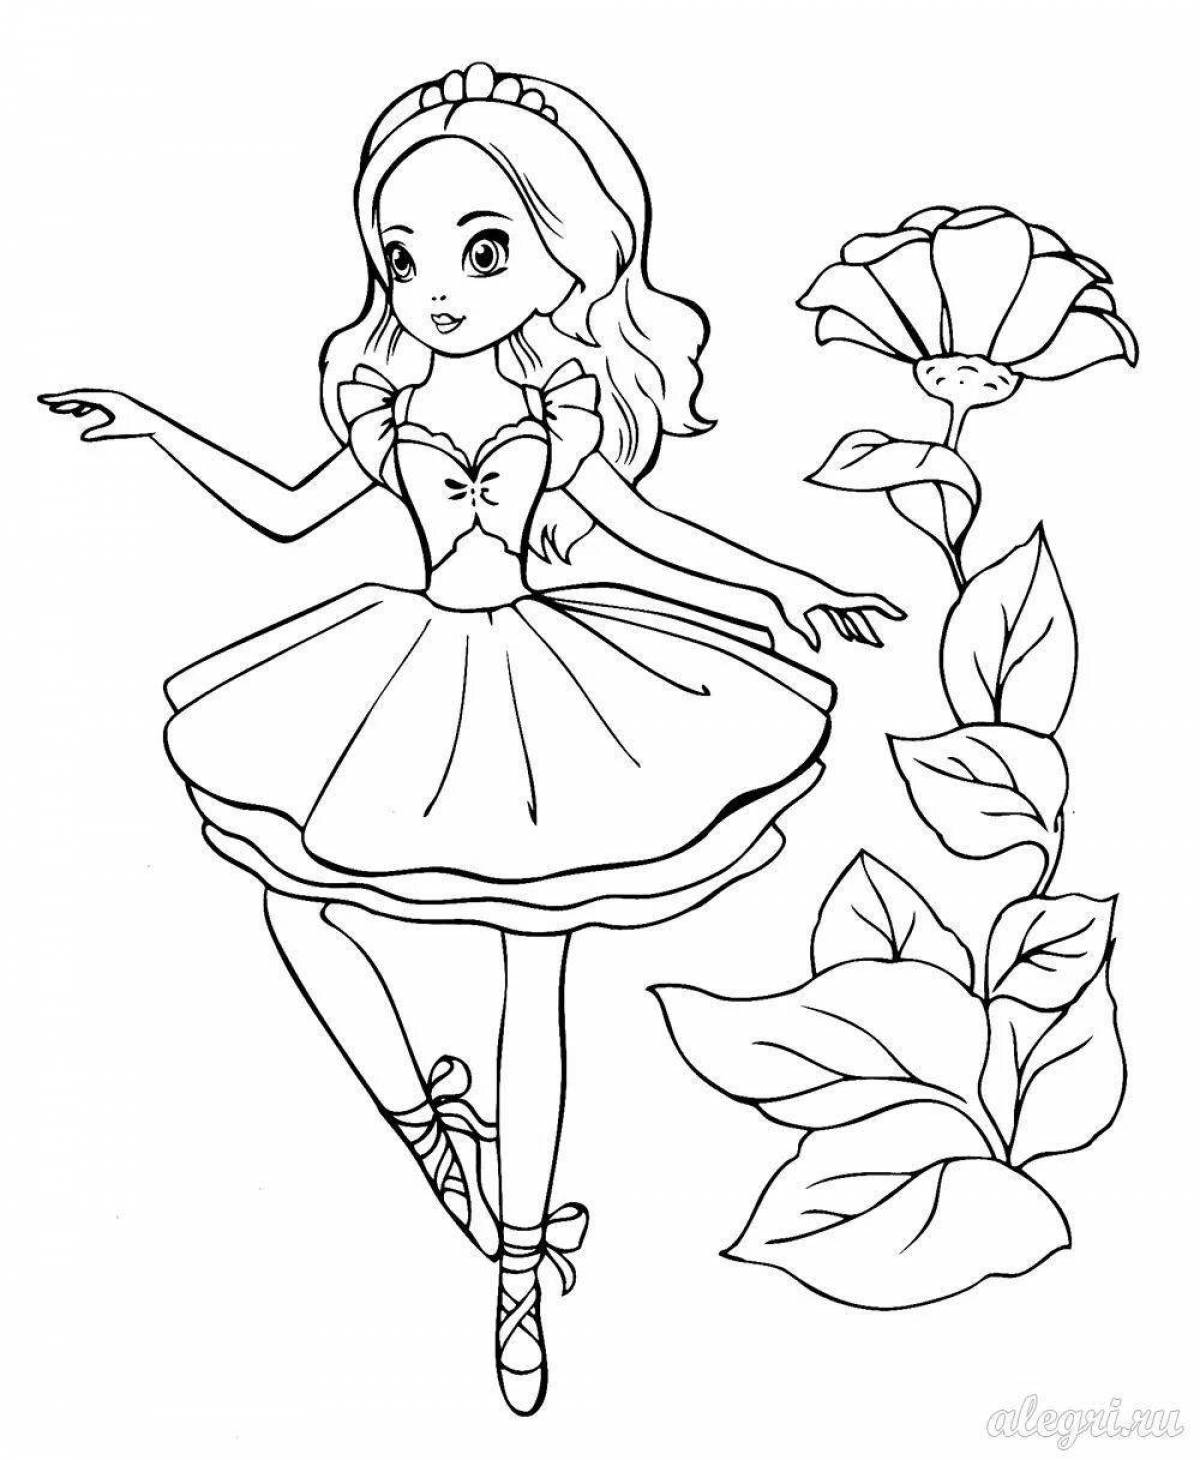 Amazing coloring book for girls 8